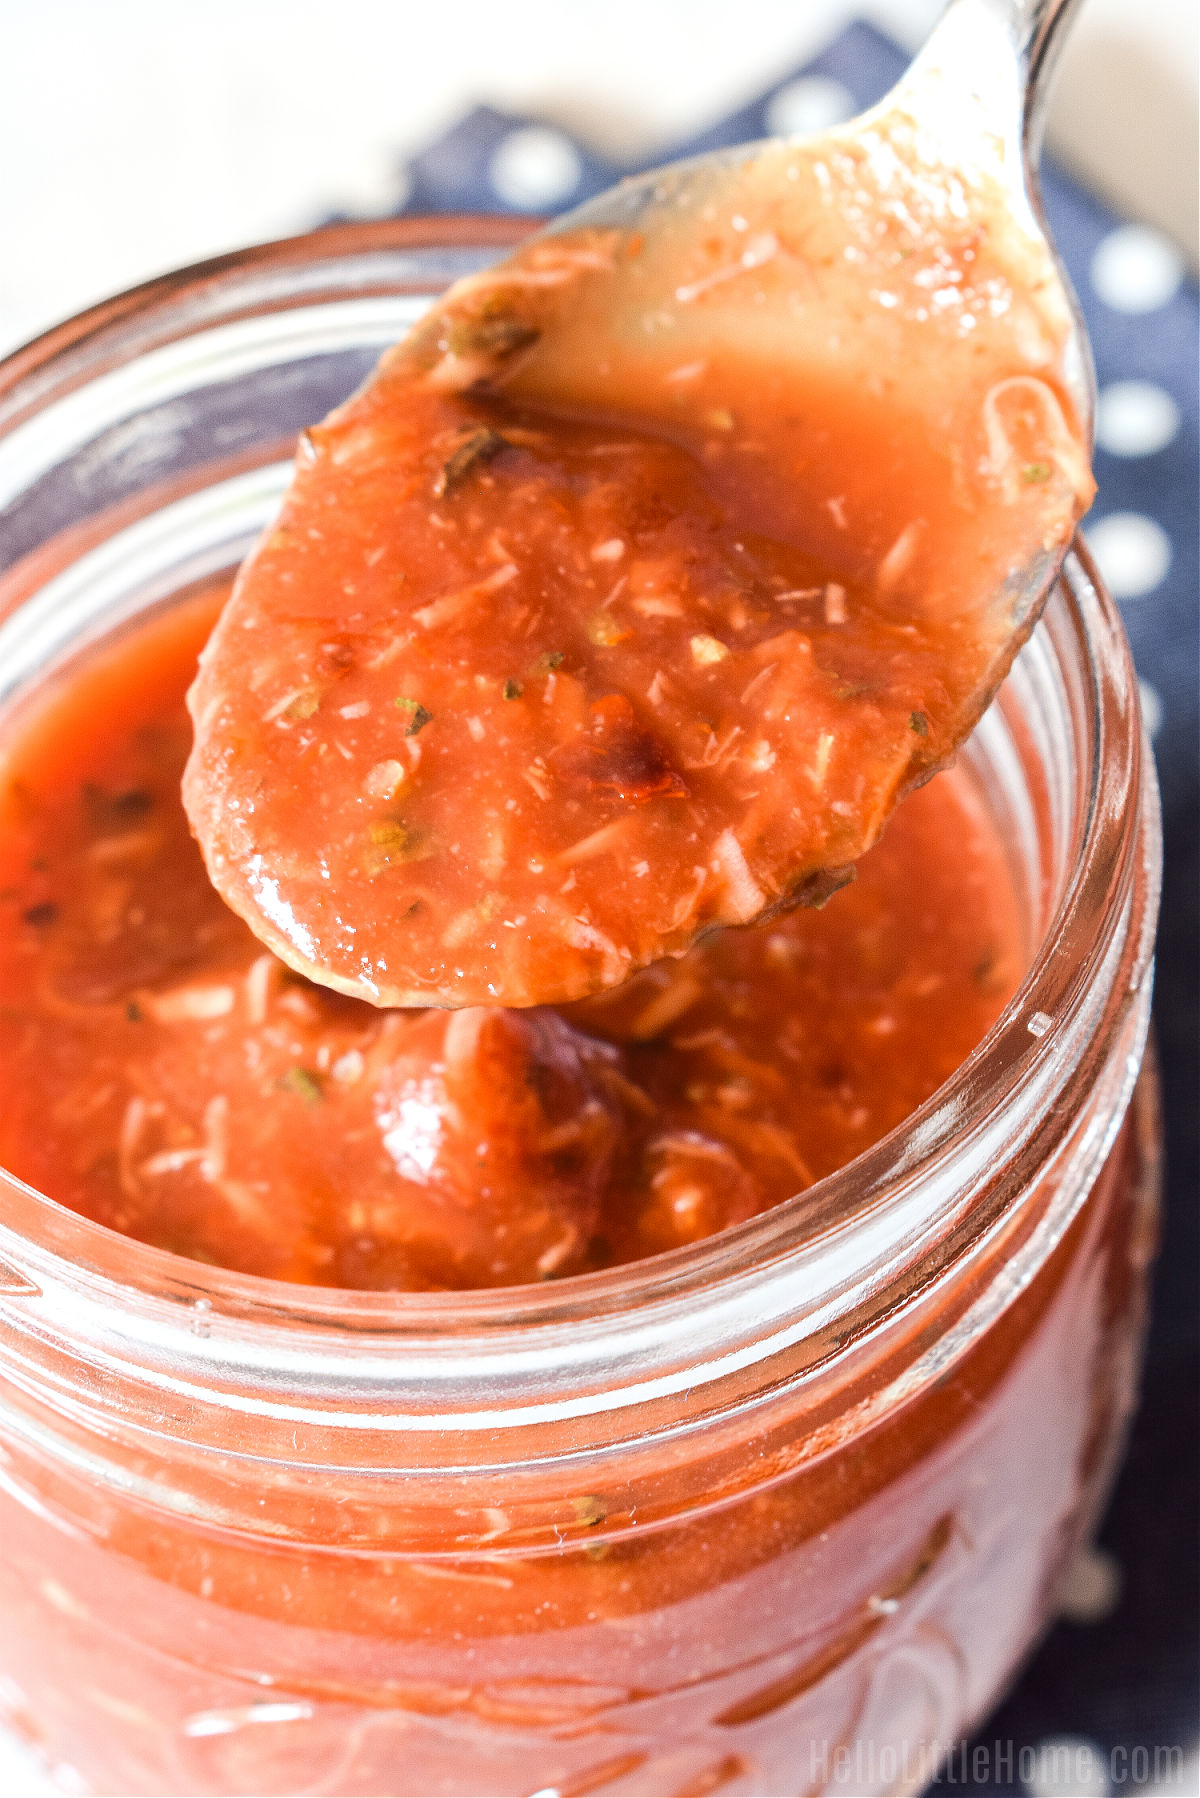 A spoon filled with pizza sauce hovering over a jar of the sauce.